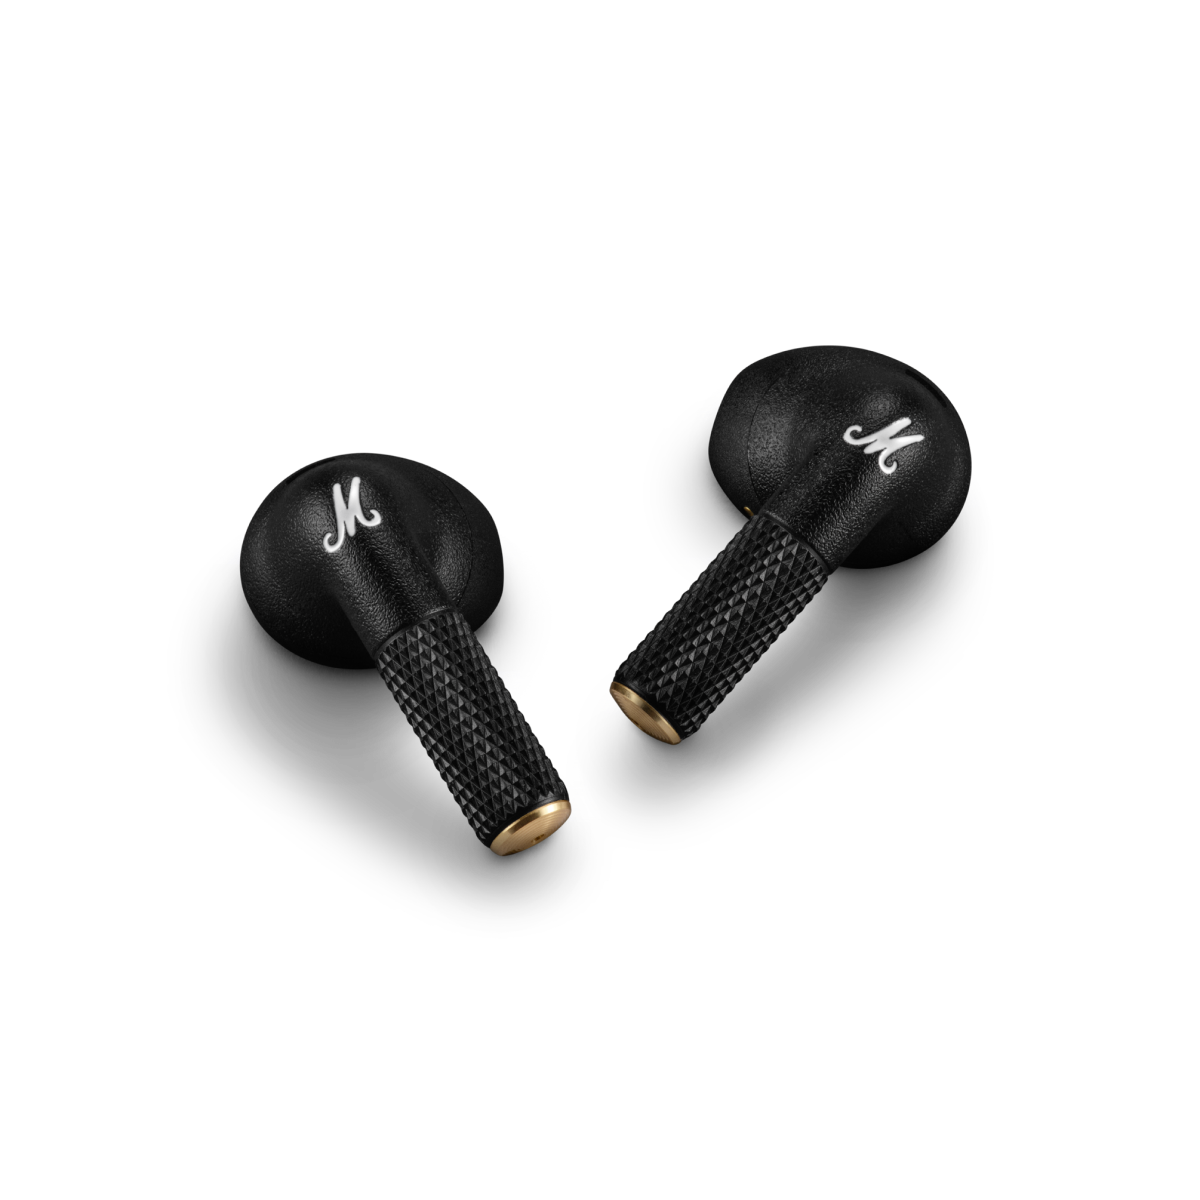 Two black Marshall Minor IV earbuds lying on a dark surface.